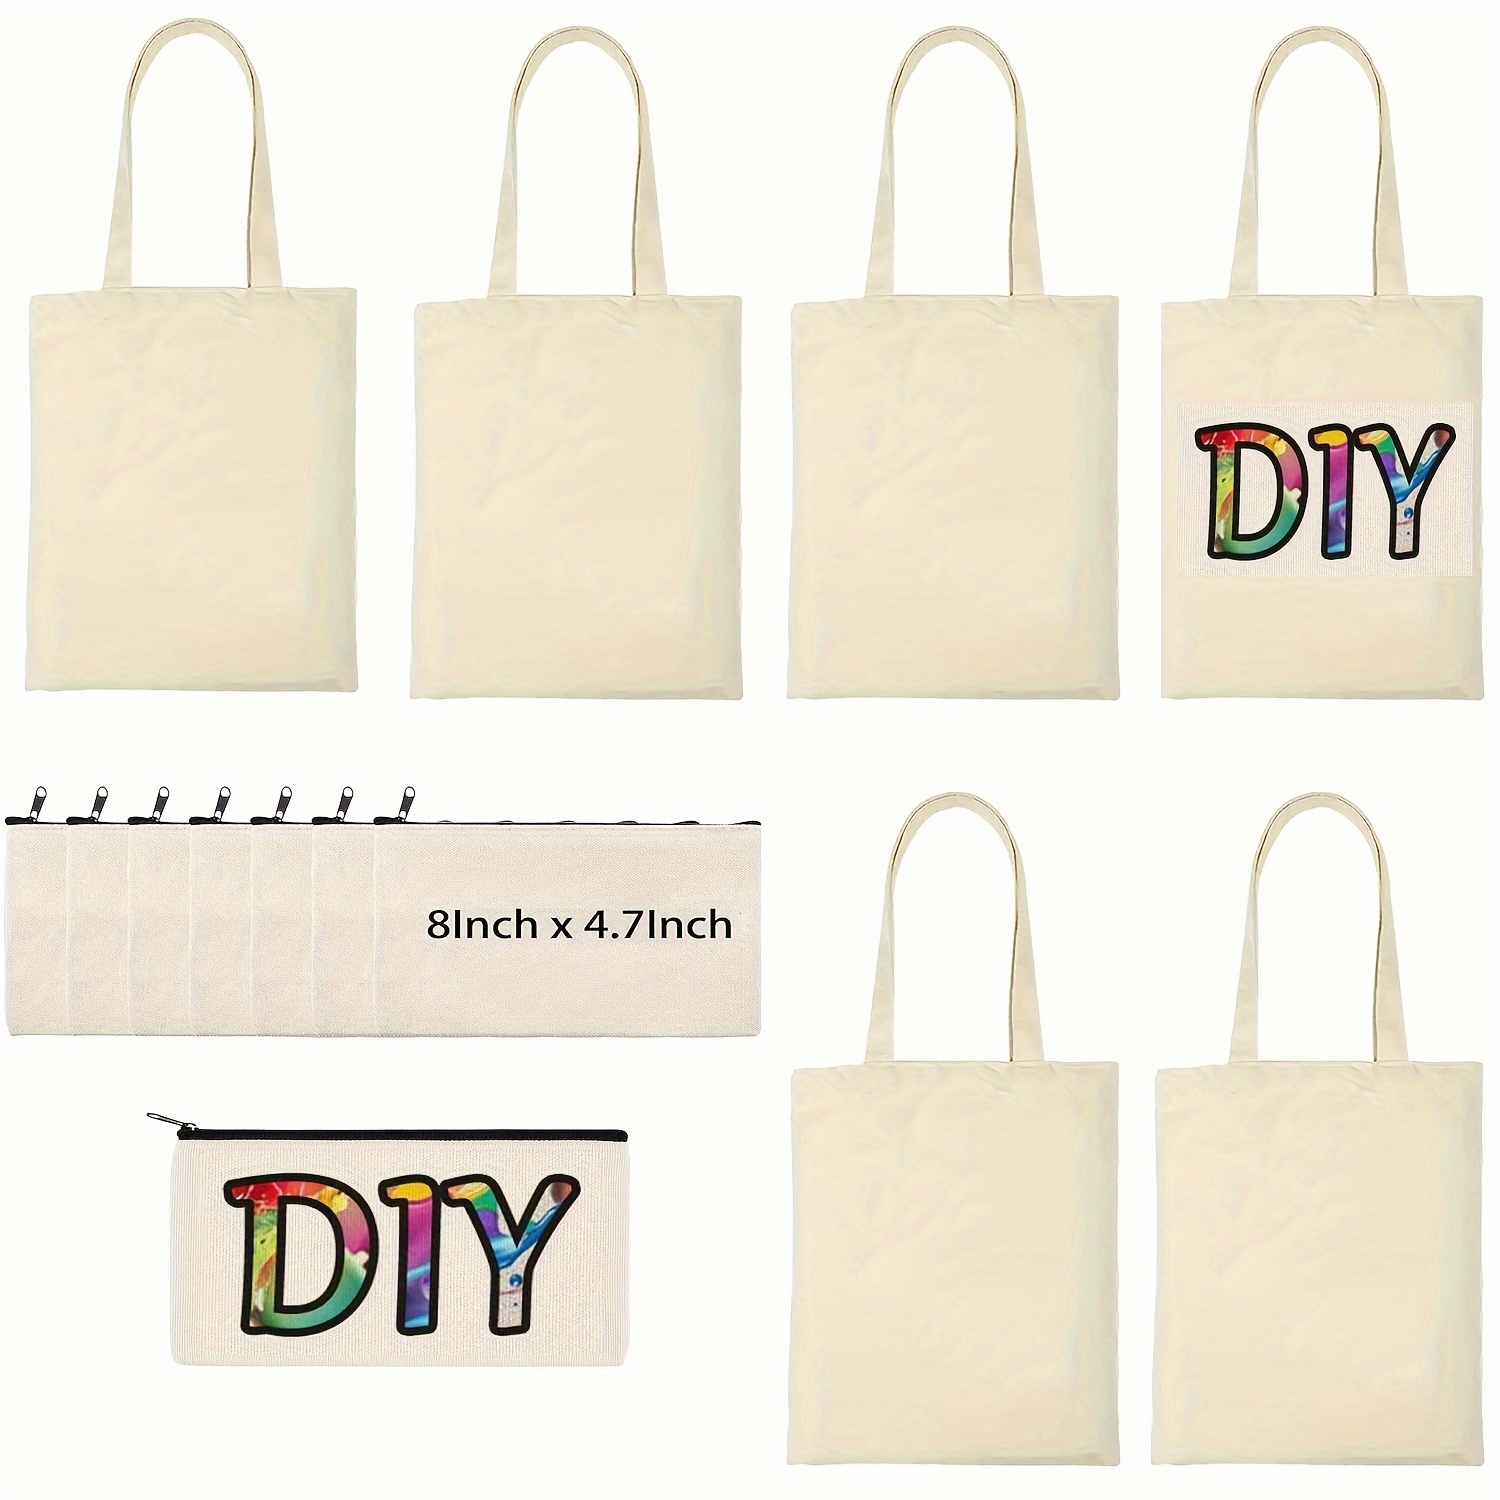 White Blank Tote Bag for Sublimation, Sublimation Tote Bag Blank 10 pack,  Blank Tote Bag, Tote Bag for Sublimation